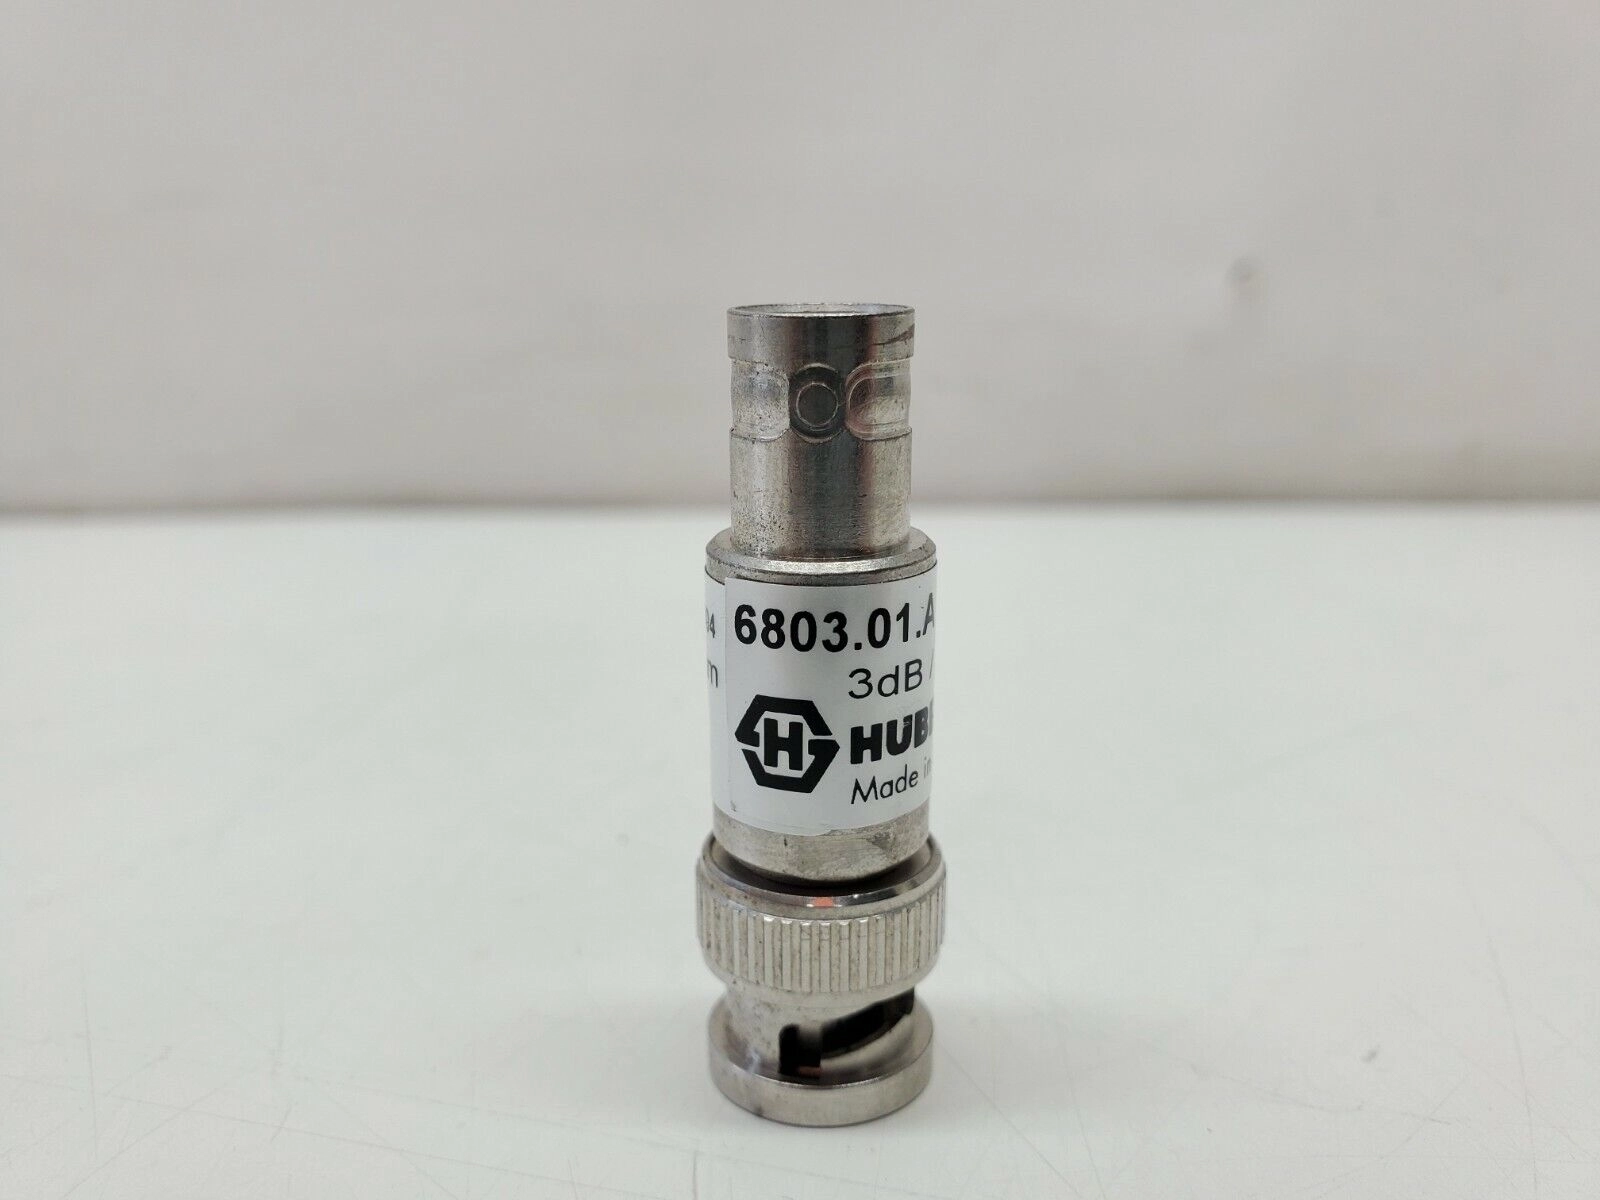 Huber Suhner 6803.01.A, 3dB / 4GHz / 50 Ohm